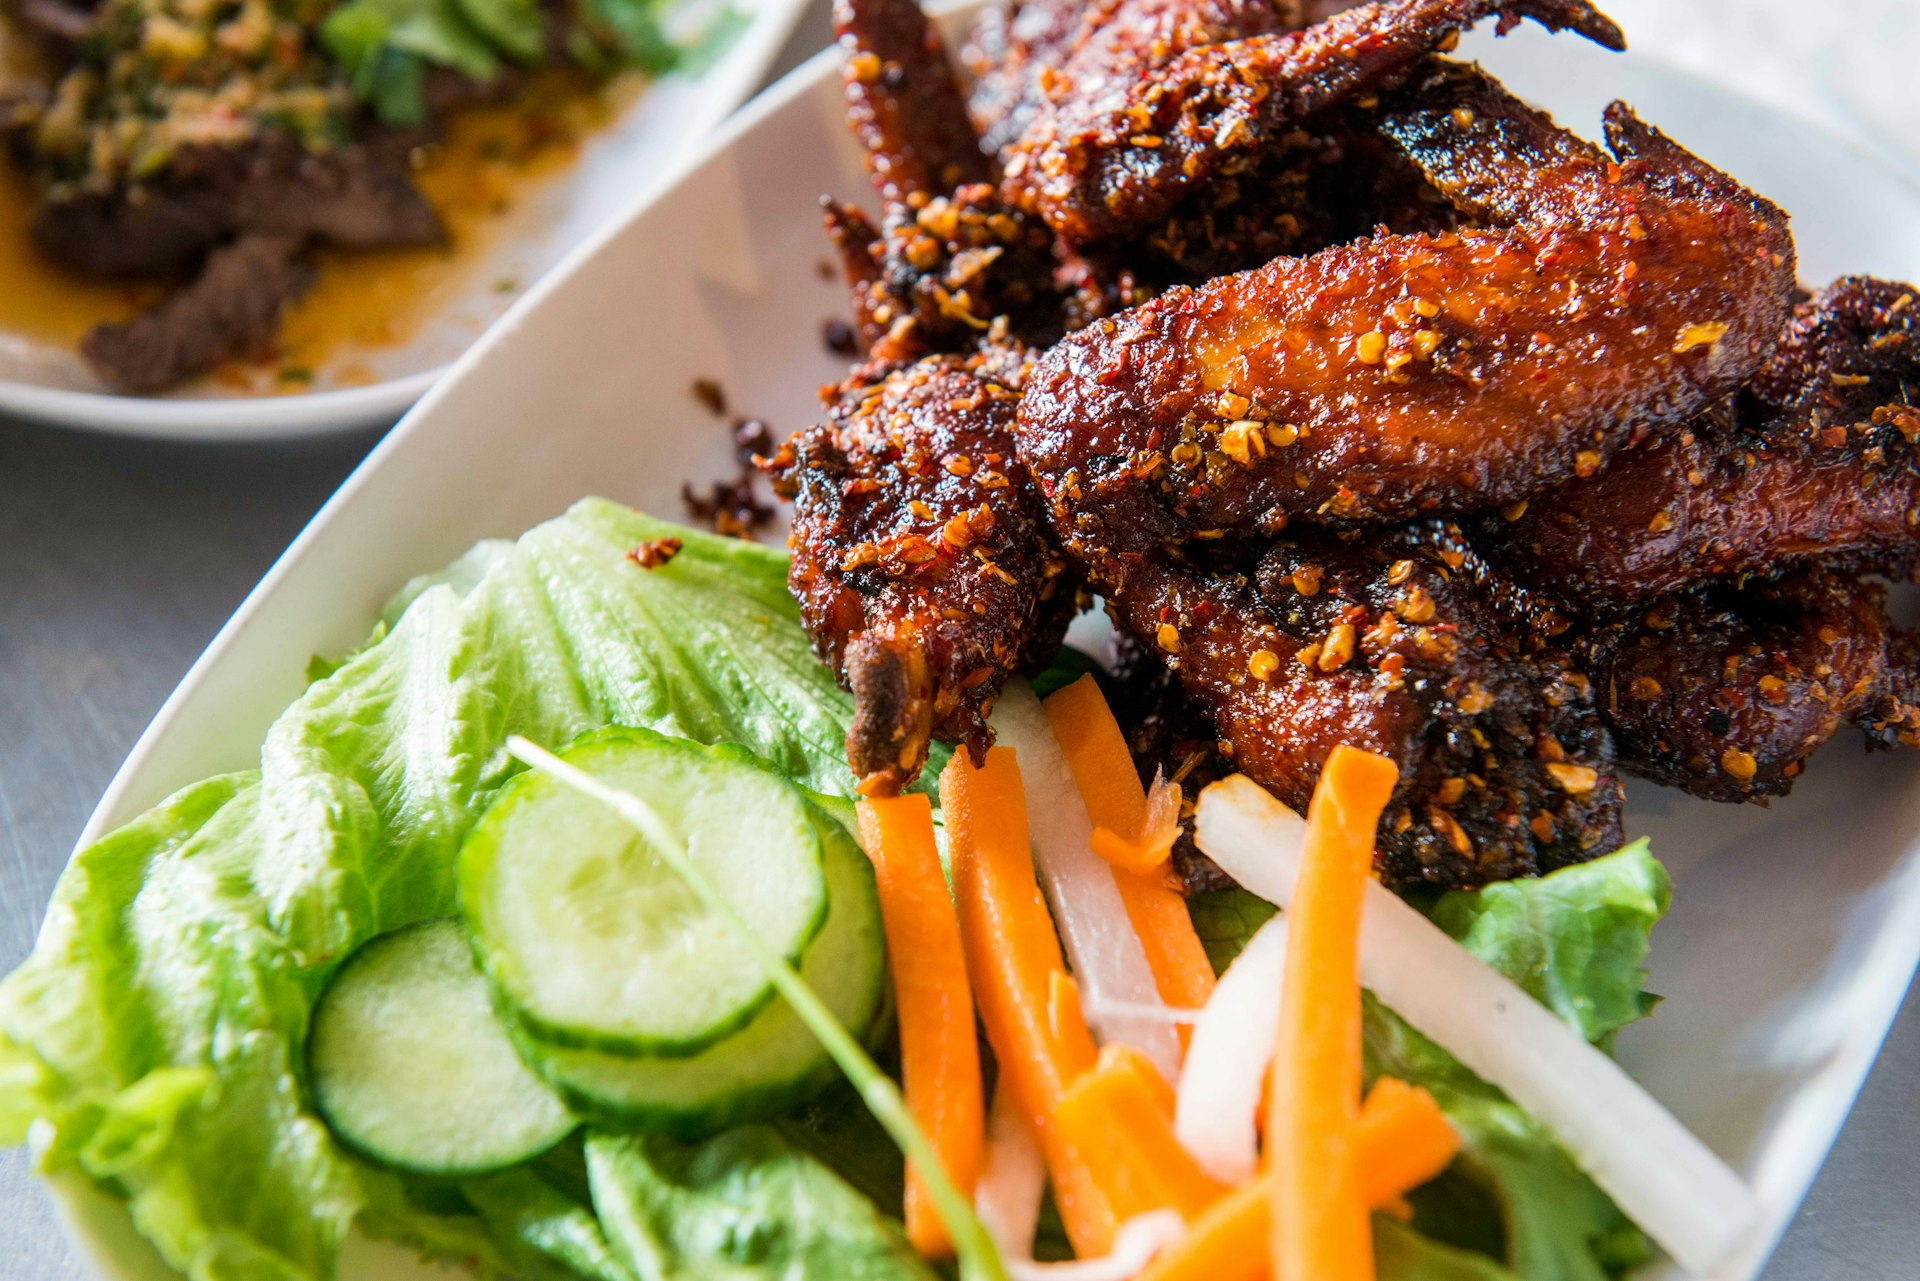 A plate of Pok Pok chicken wings. Image by Flash Parker / Lonely Planet